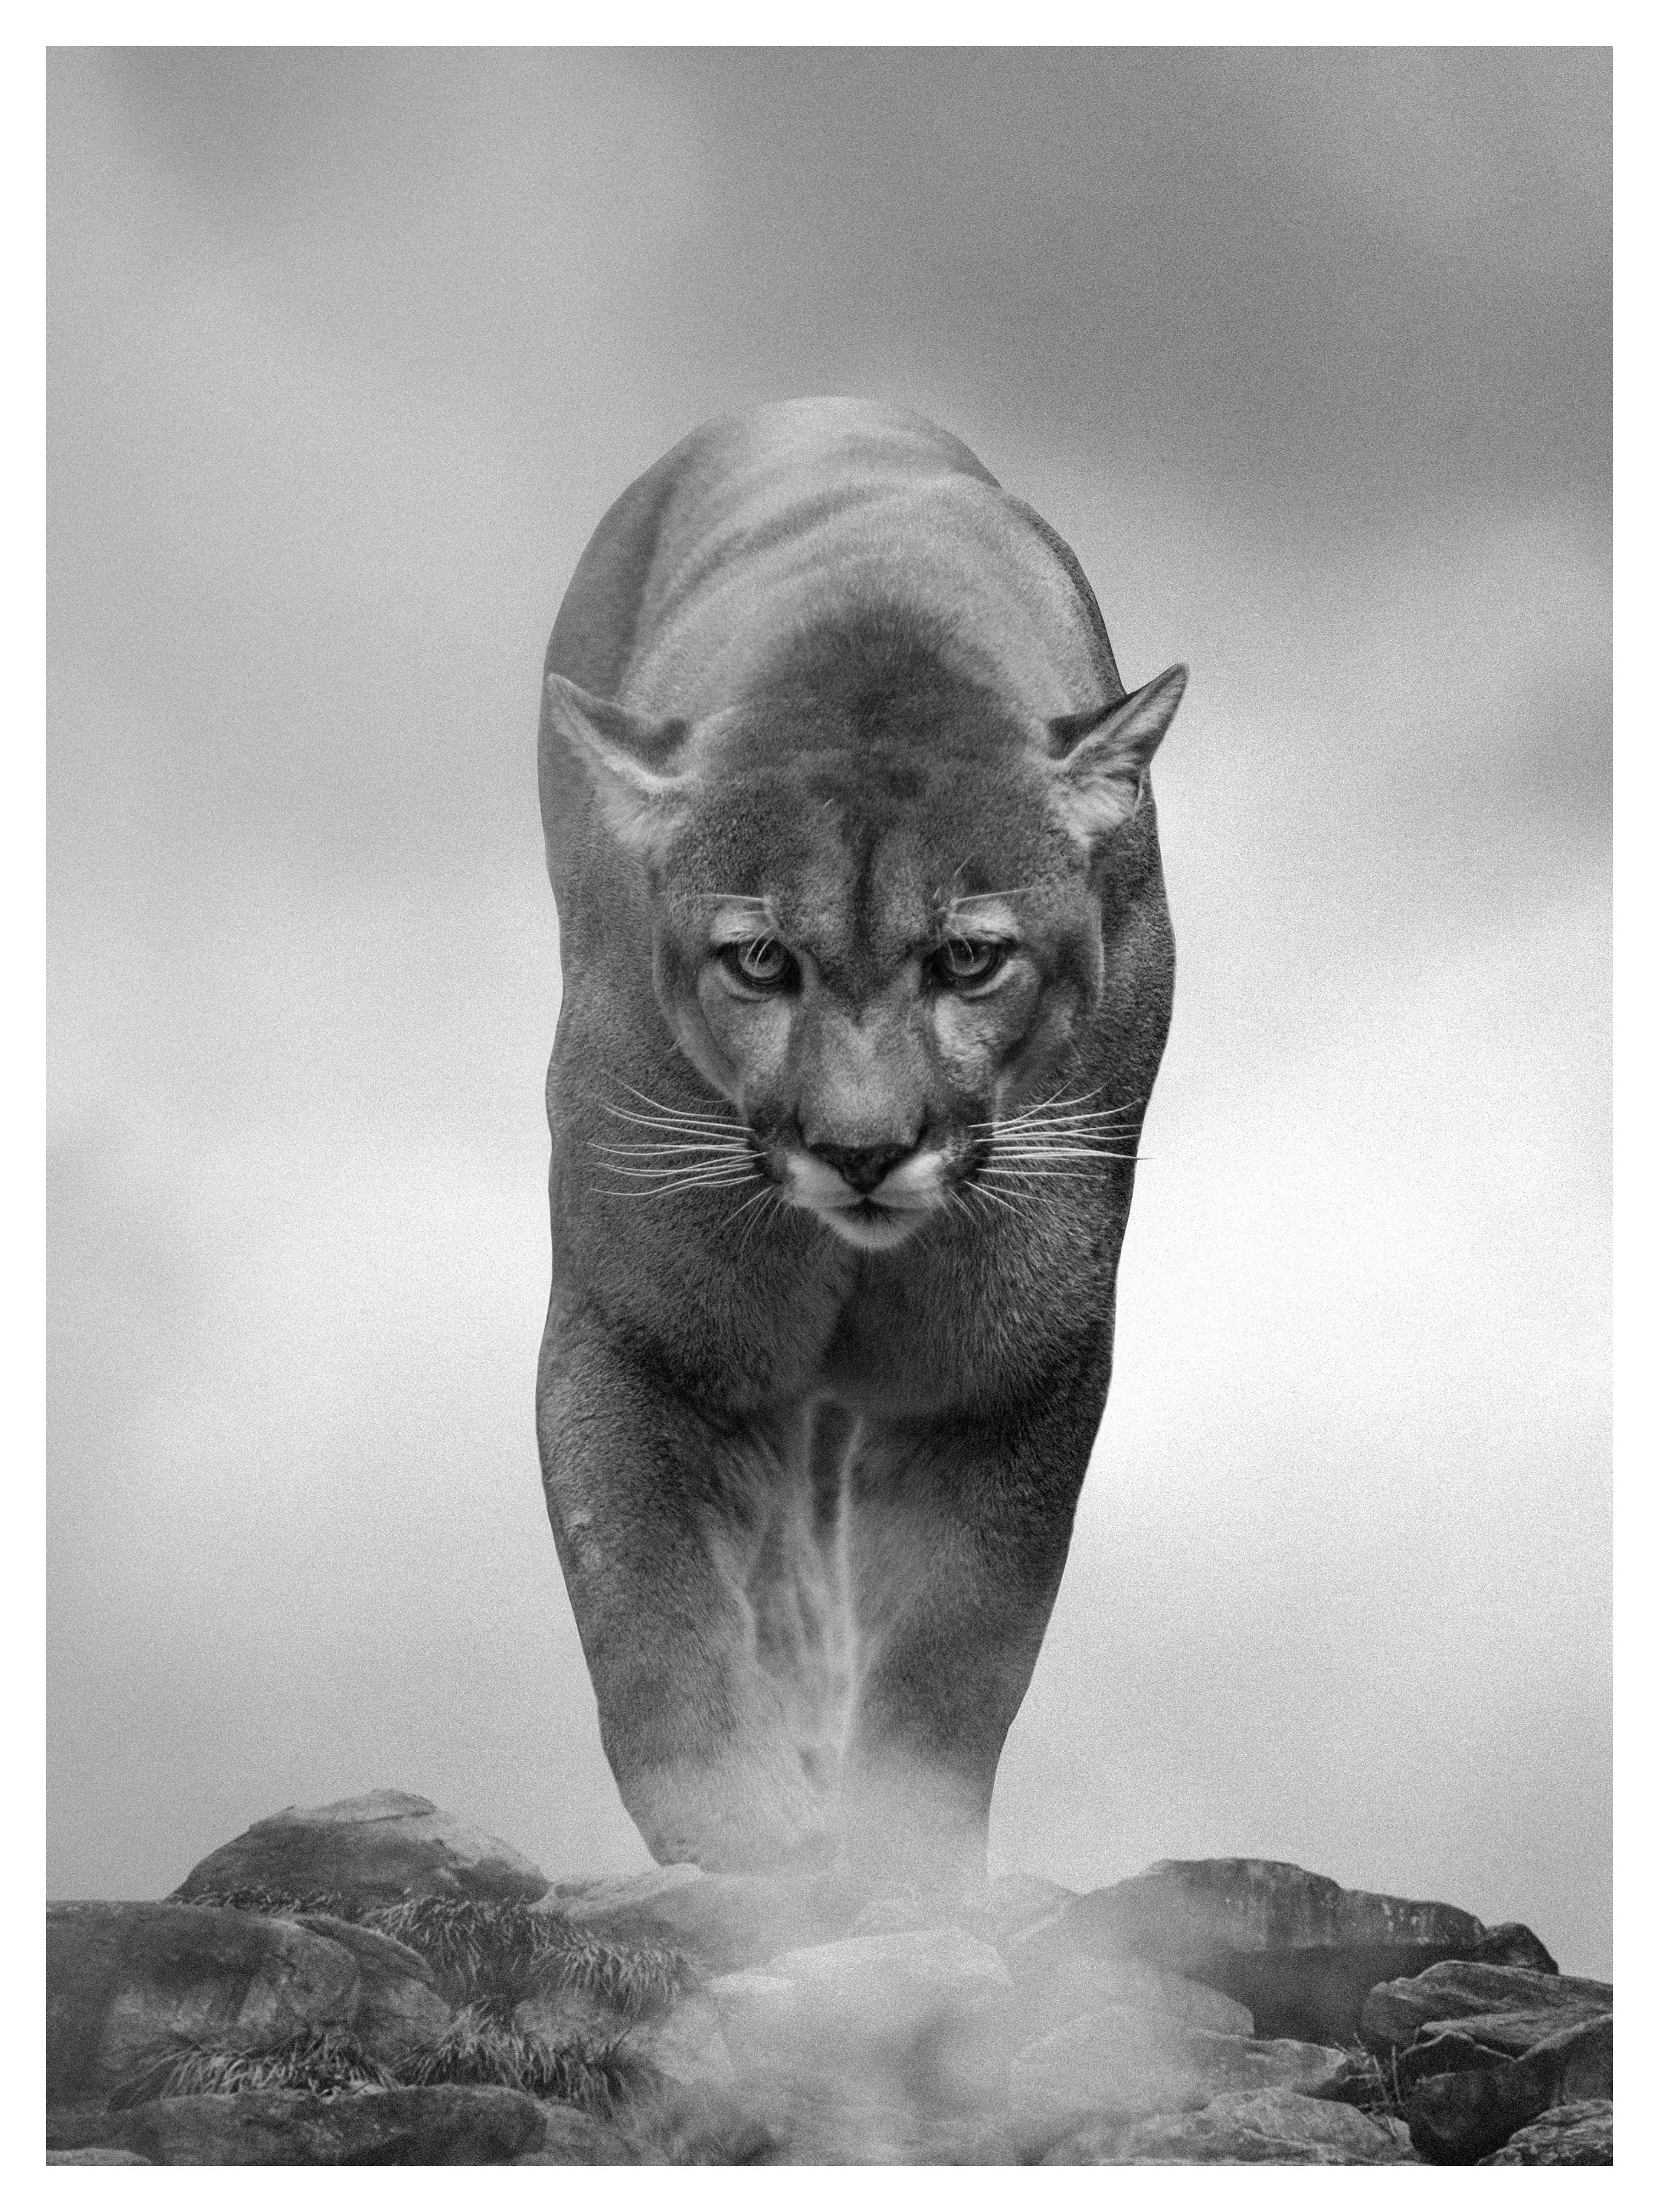 Shane Russeck Animal Print - "King of the Mountain" 50x90 Black and White Photography, Cougar, Mountain Lion